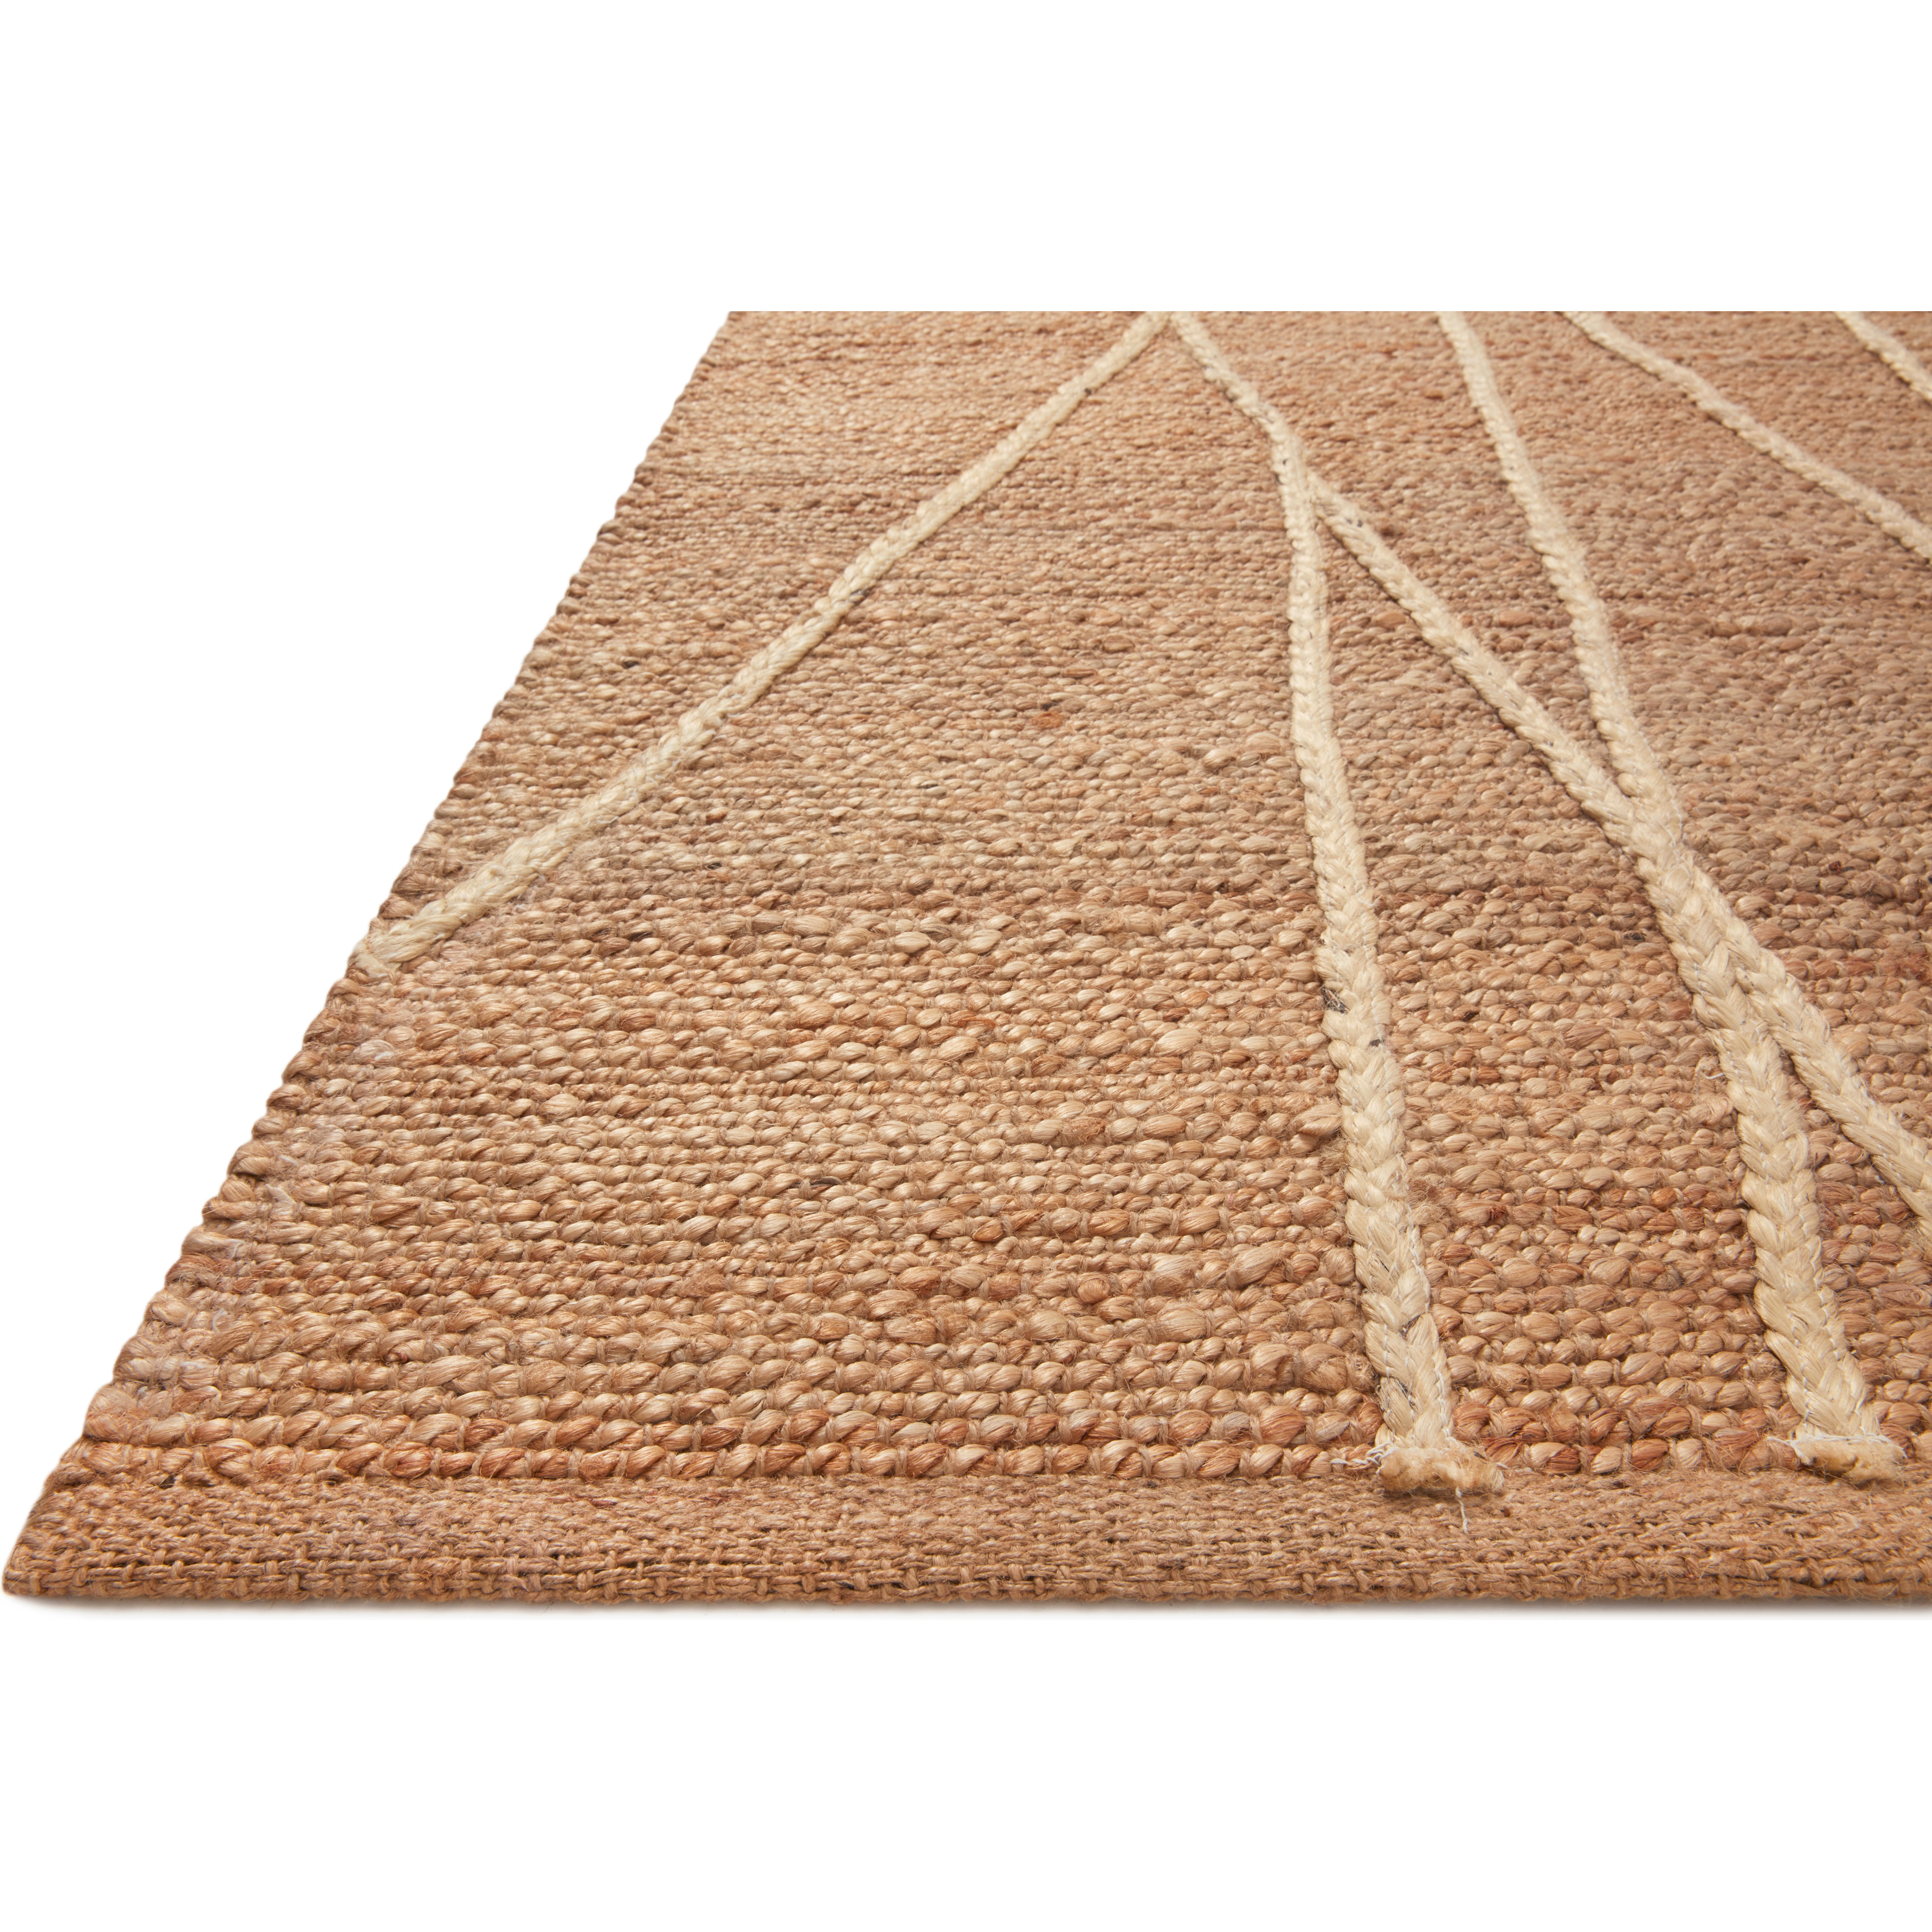 A tonal approach to Moroccan-inspired rugs, the Bodhi Natural / Ivory BOD-03 rug from Loloi is hand-woven of 100% jute. This rug features linear and braided details, creating natural variations that make a subtle yet striking statement for an entryway, living room, hallway or kitchen runner, or dining room. Amethyst Home provides interior design, new construction, custom furniture, and rugs for the Chicago metro area.